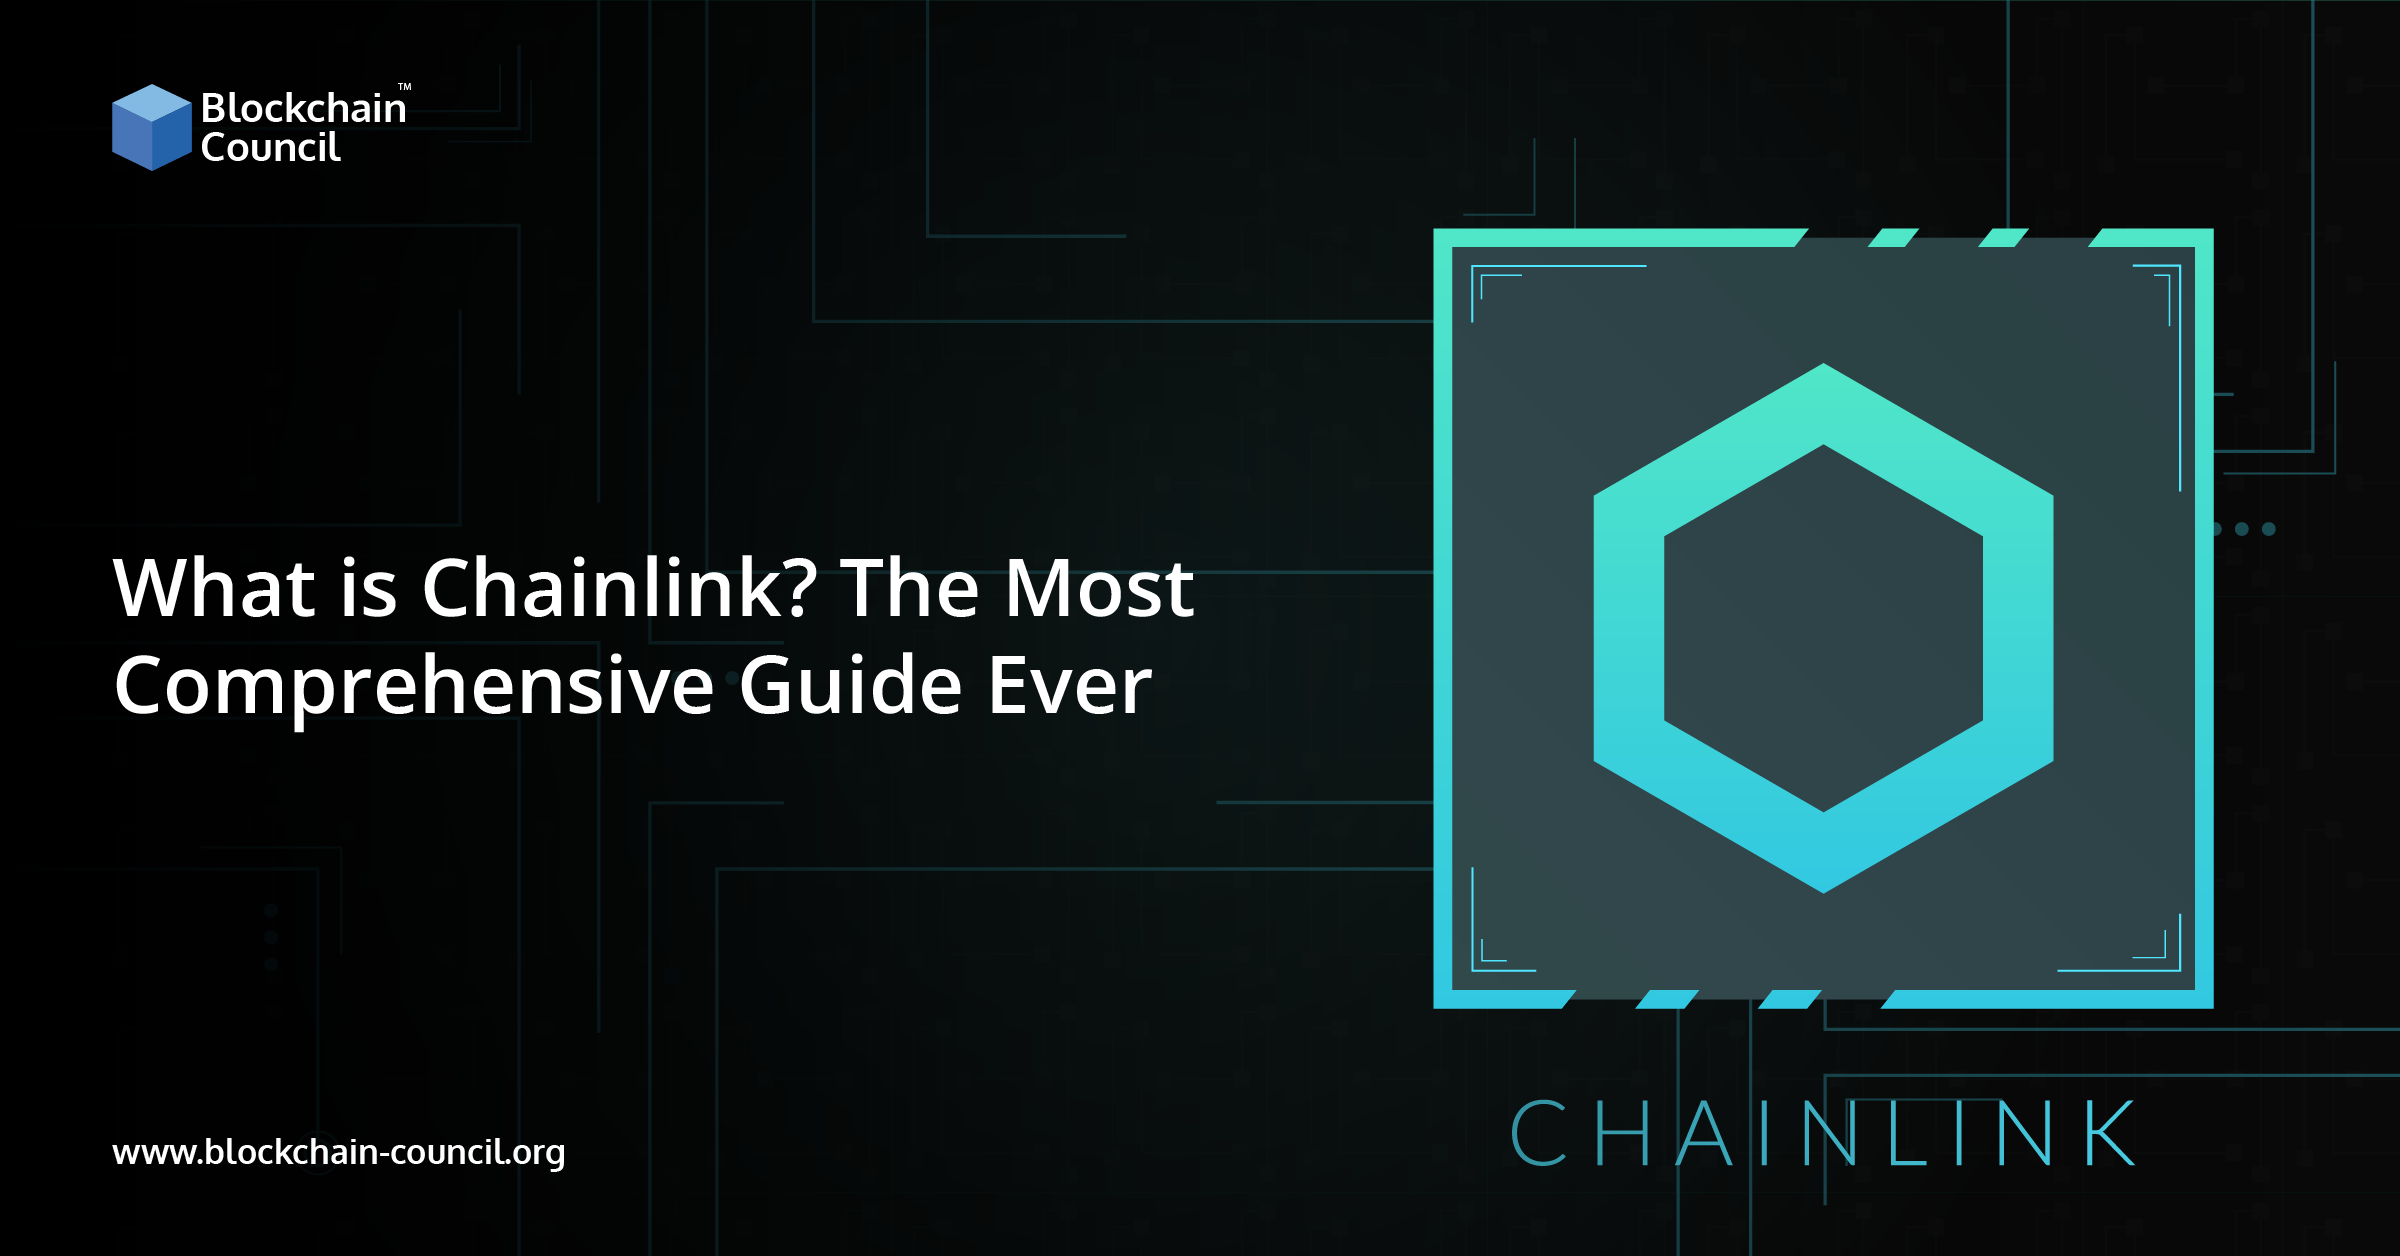 What is Chainlink? The Most Comprehensive Guide Ever